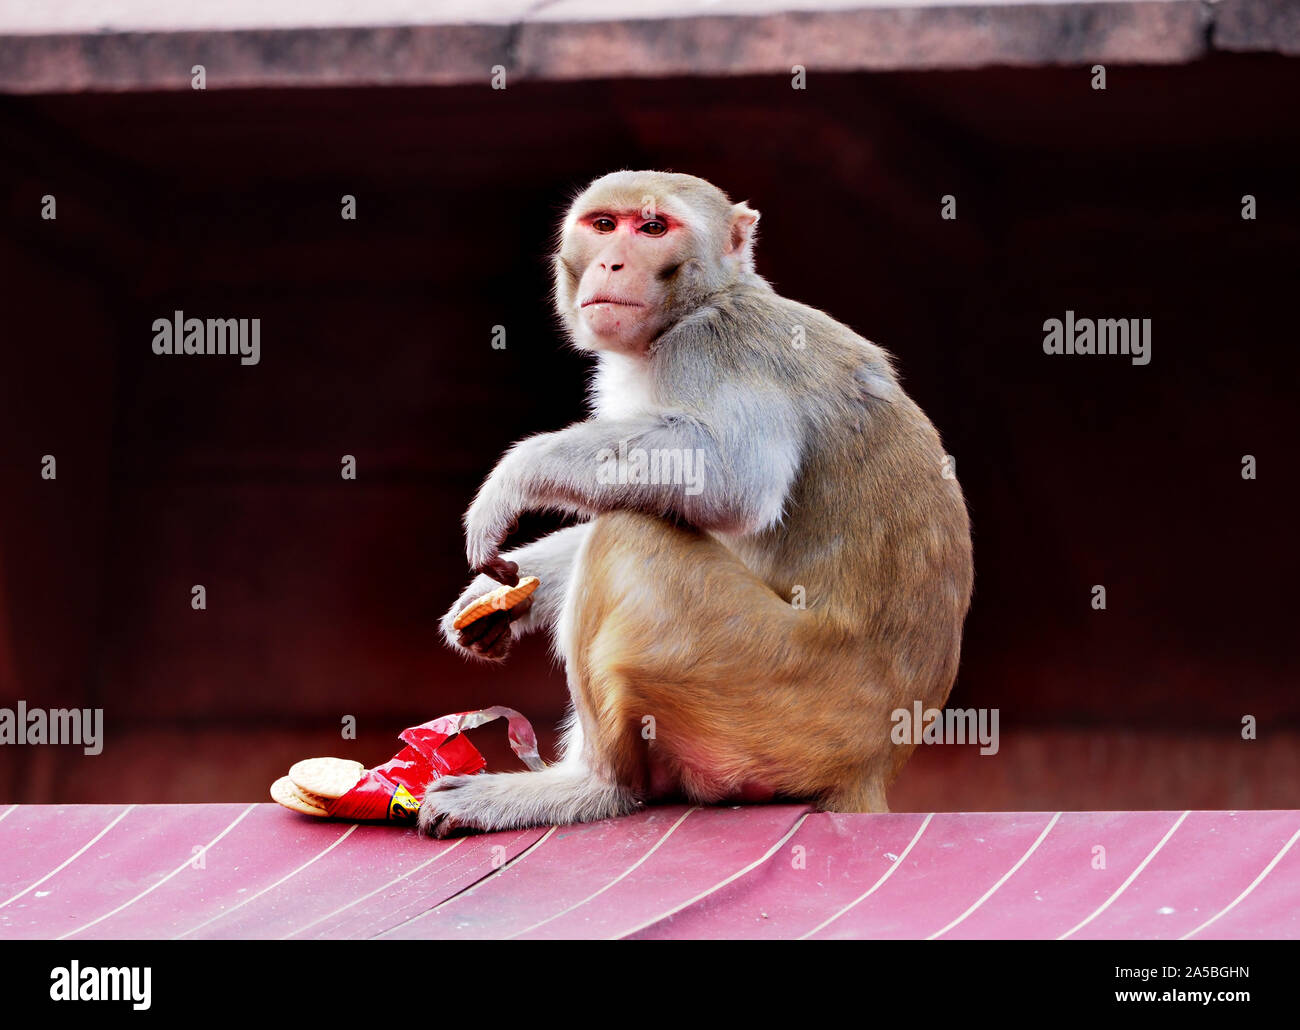 Macaque monkey eating a packet of biscuits at the Taj Mahal in Agra, India. Stock Photo